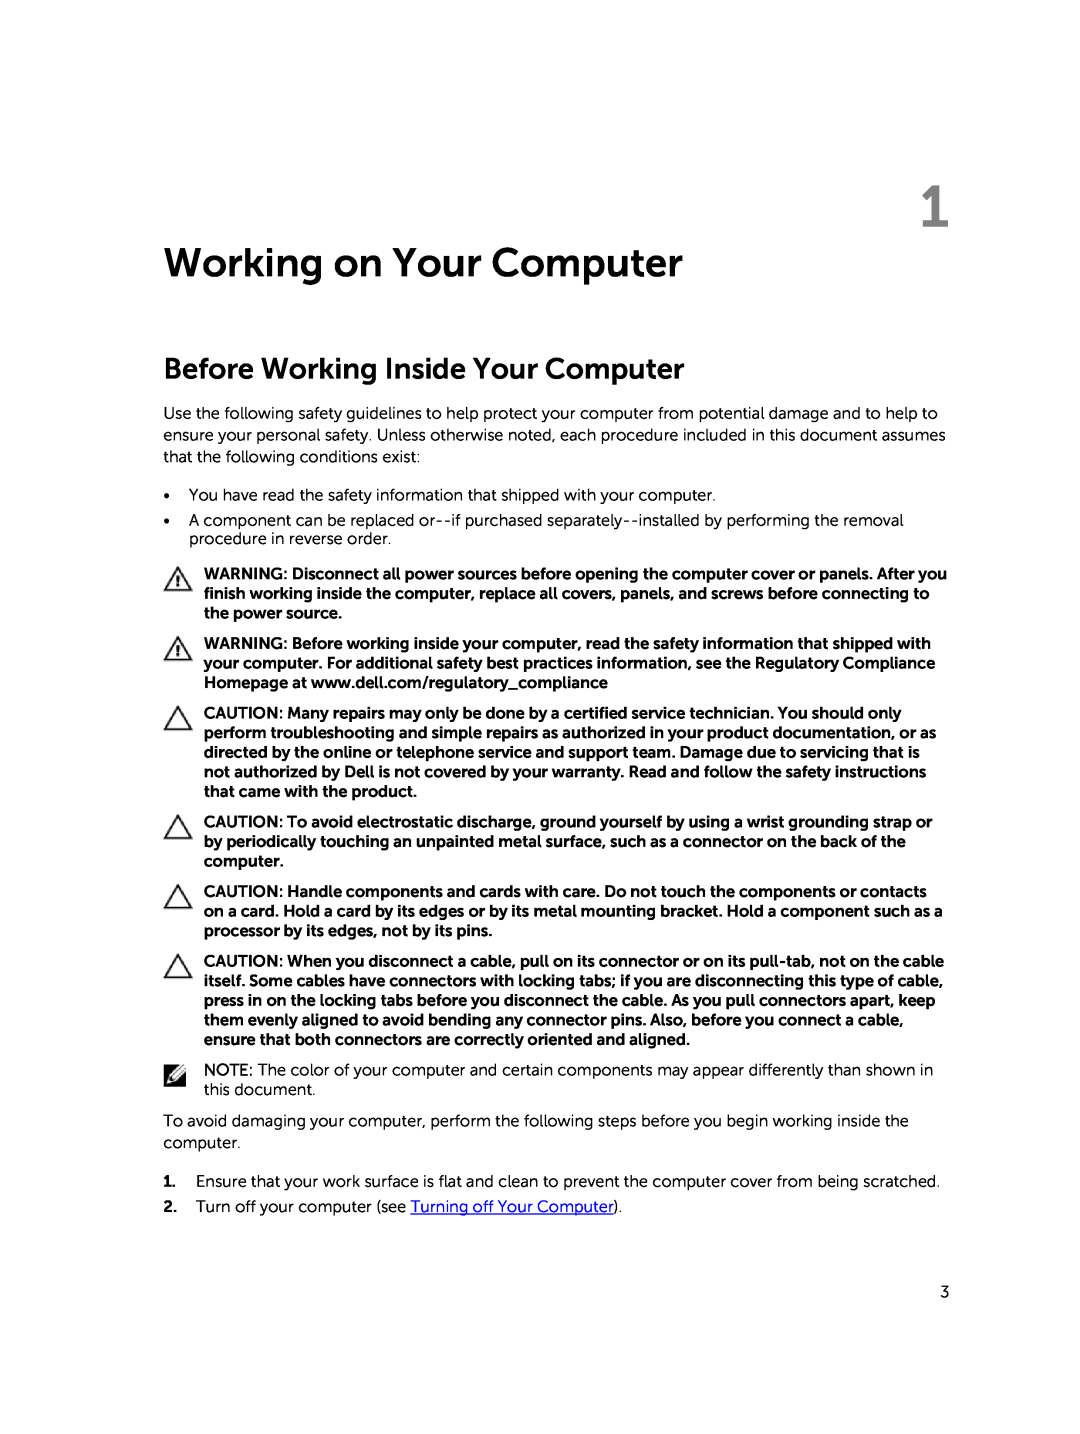 Dell E5450 owner manual Working on Your Computer, Before Working Inside Your Computer 